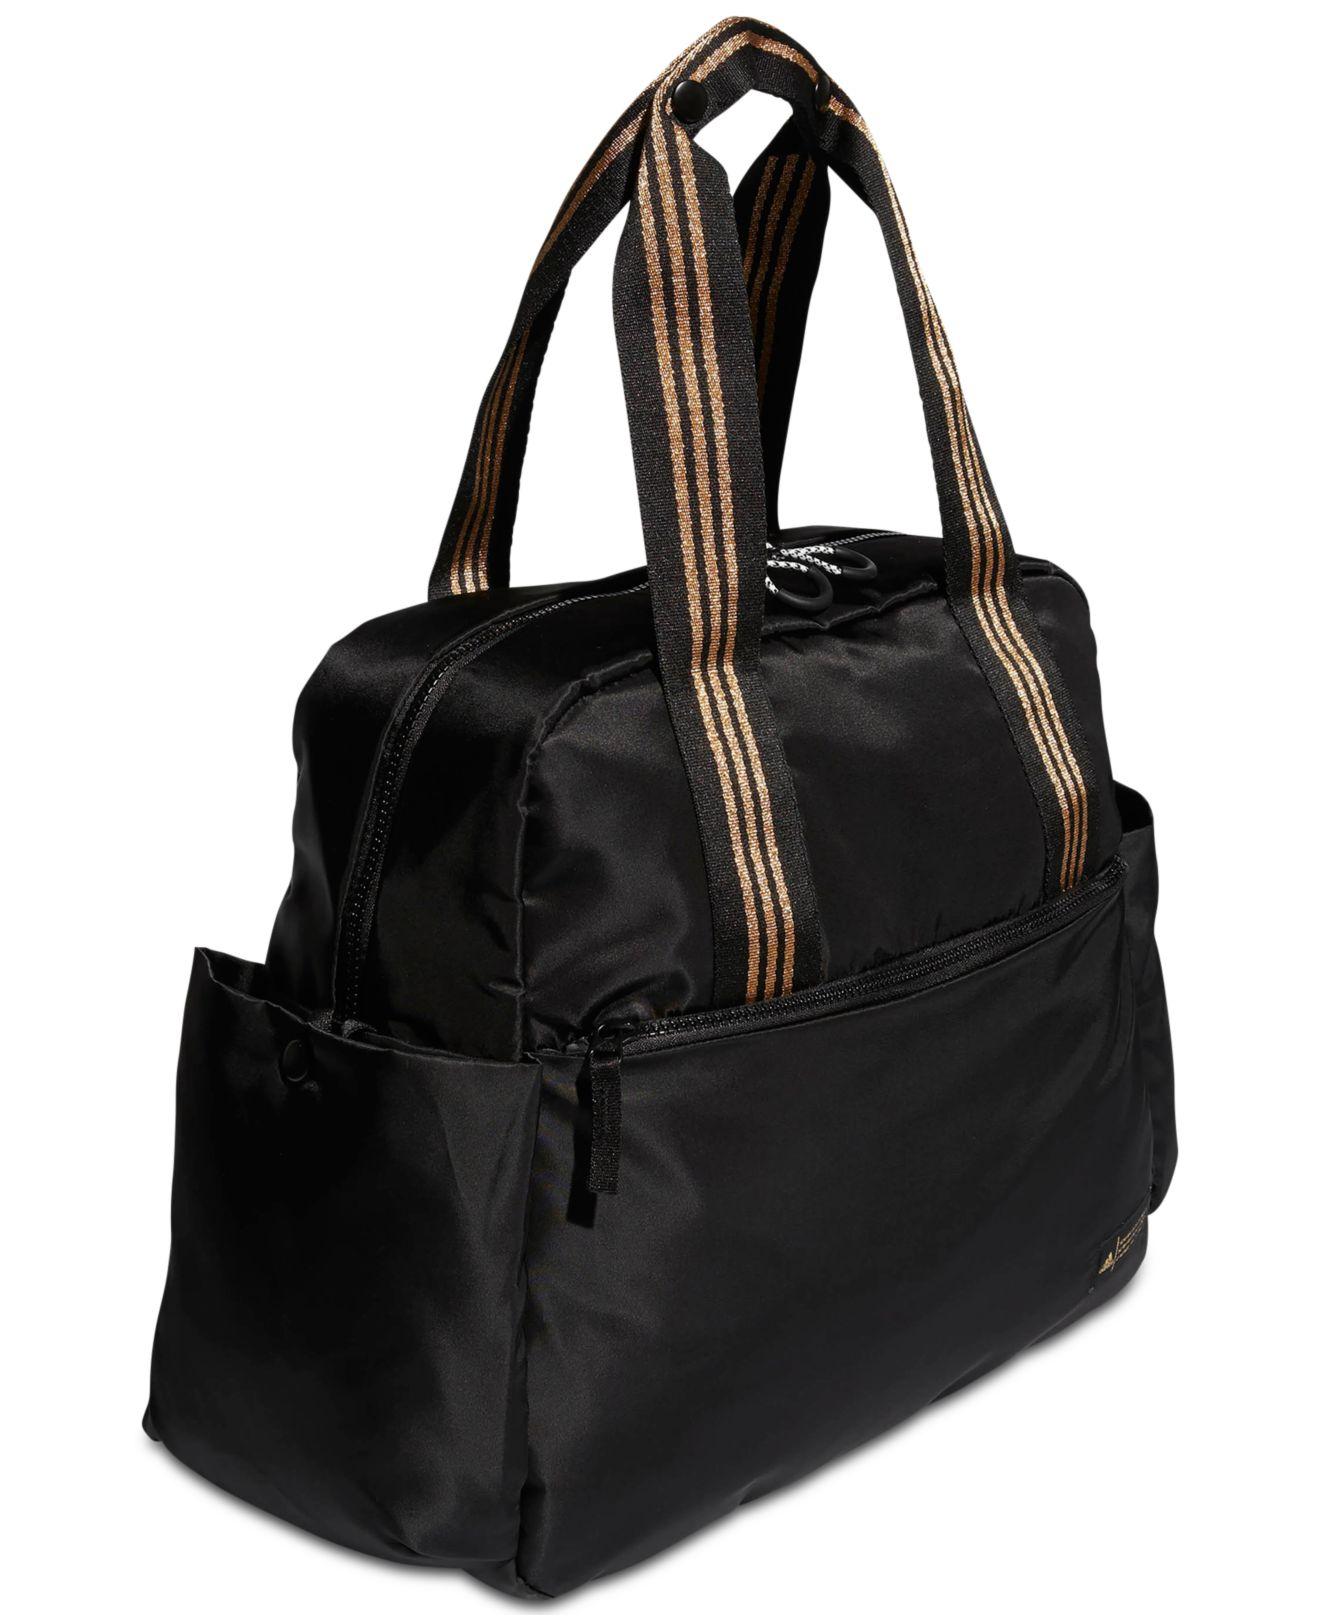 adidas Synthetic Sport To Street Tote Bag Accessories in Black | Lyst